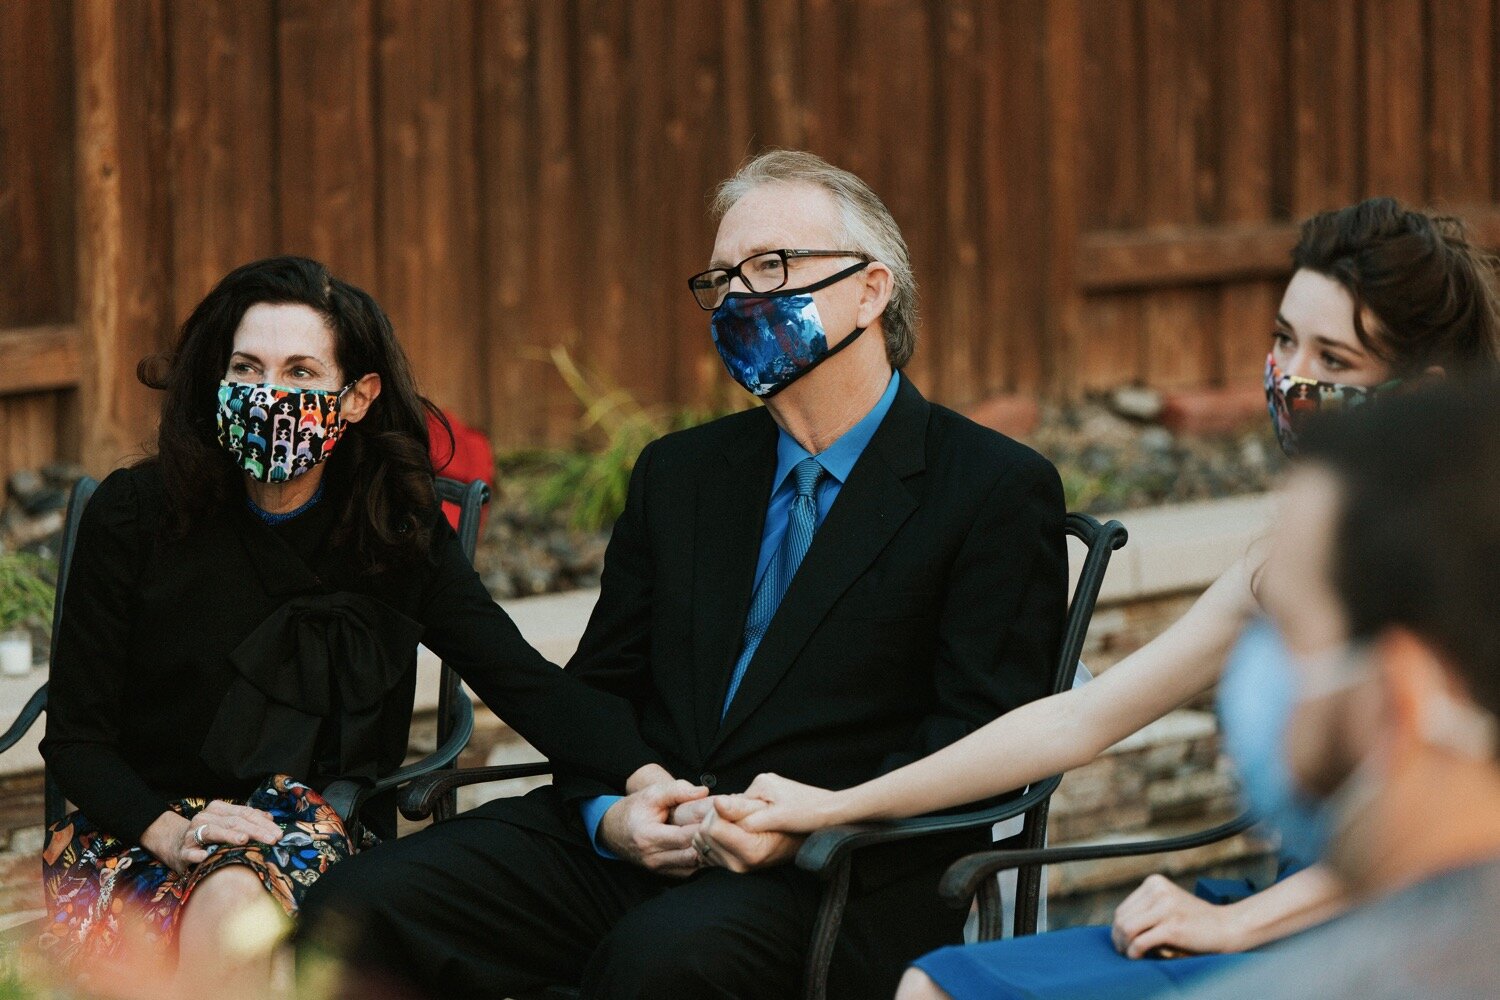  family members, wearing masks due to the coronavirus pandemic, watch as their son is married in an intimate wedding ceremony in westlake village, near los angeles. san luis obispo wedding photography duo poppy and vine was there to capture the elope